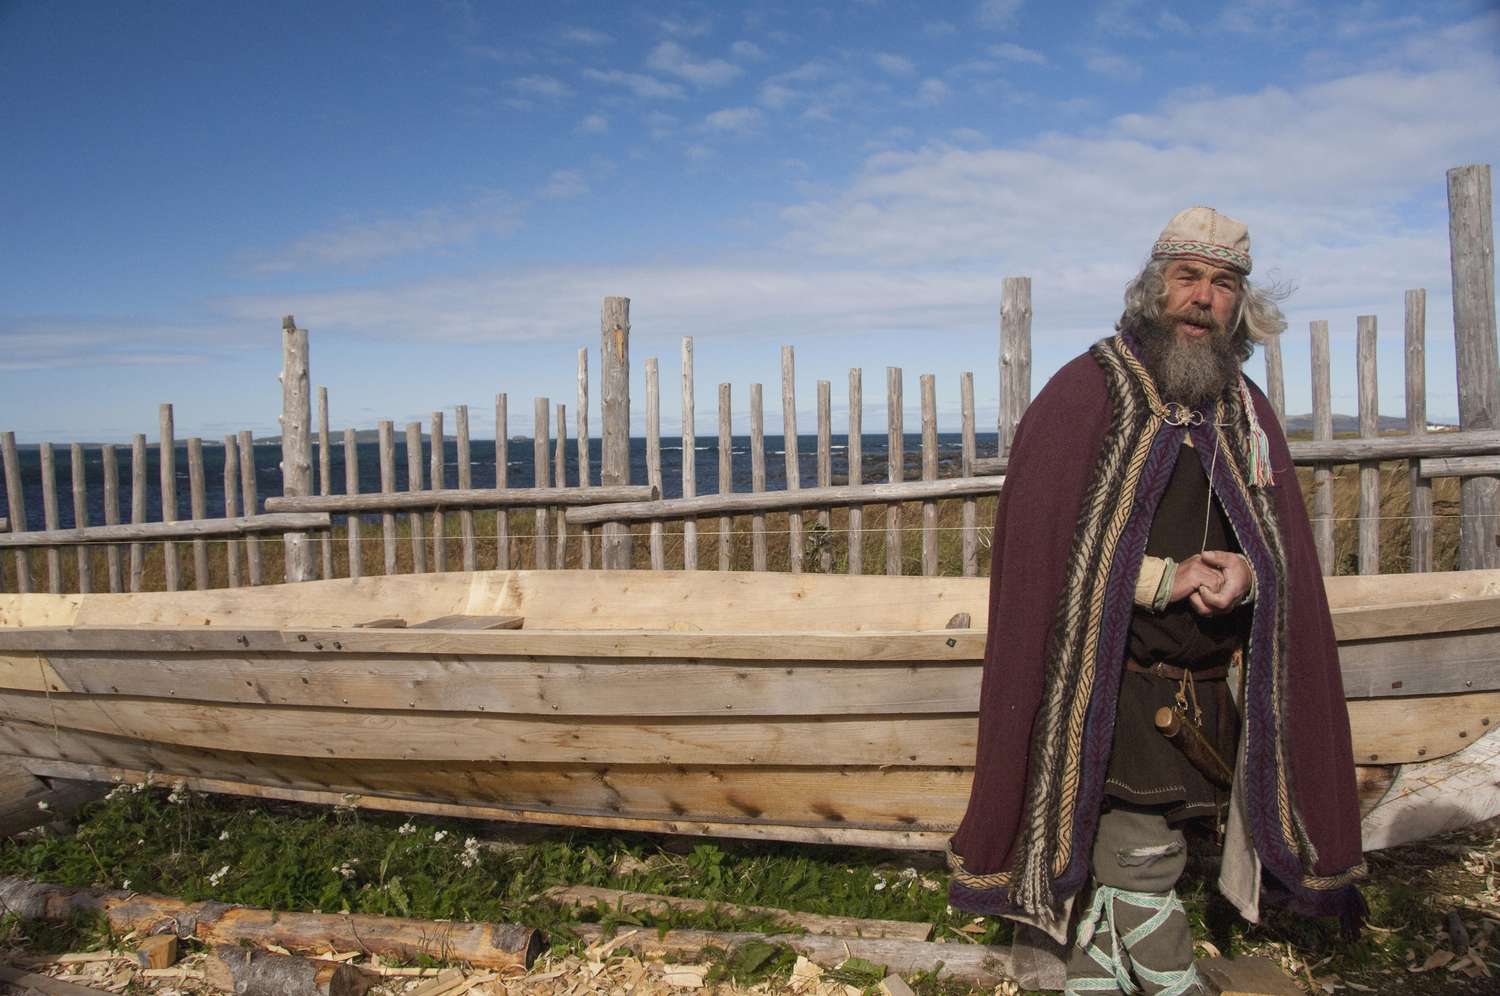 Viking actor in typical attire in front of longboat replica, L'Anse Aux Meadows, Newfoundland